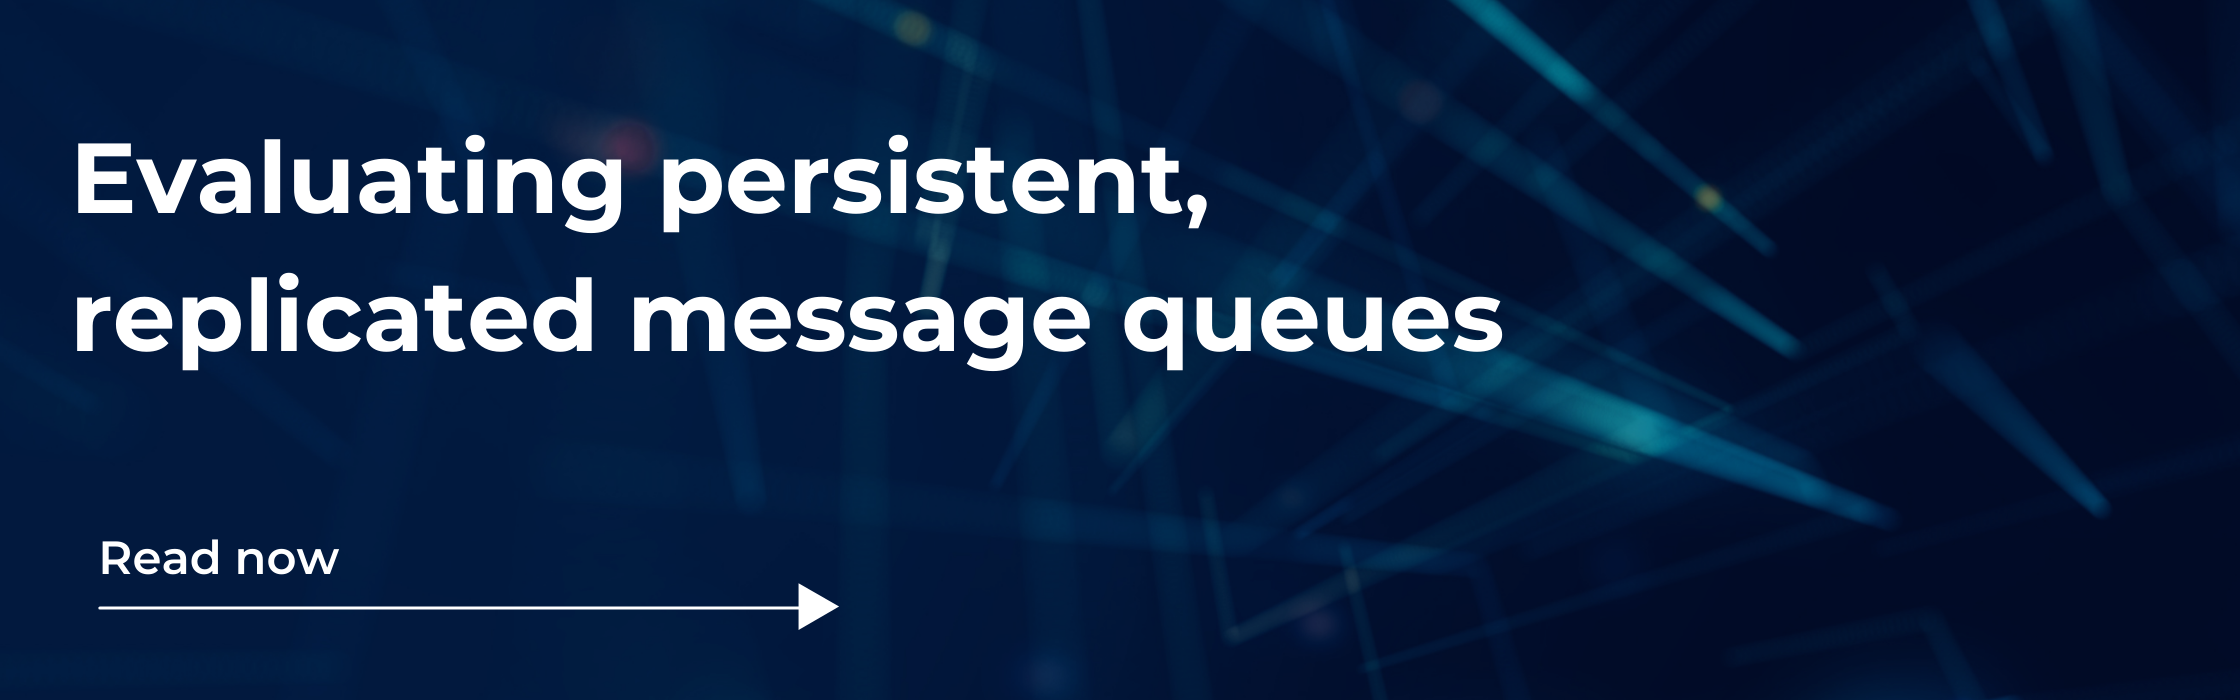 Evaluating persistent, replicated message queues